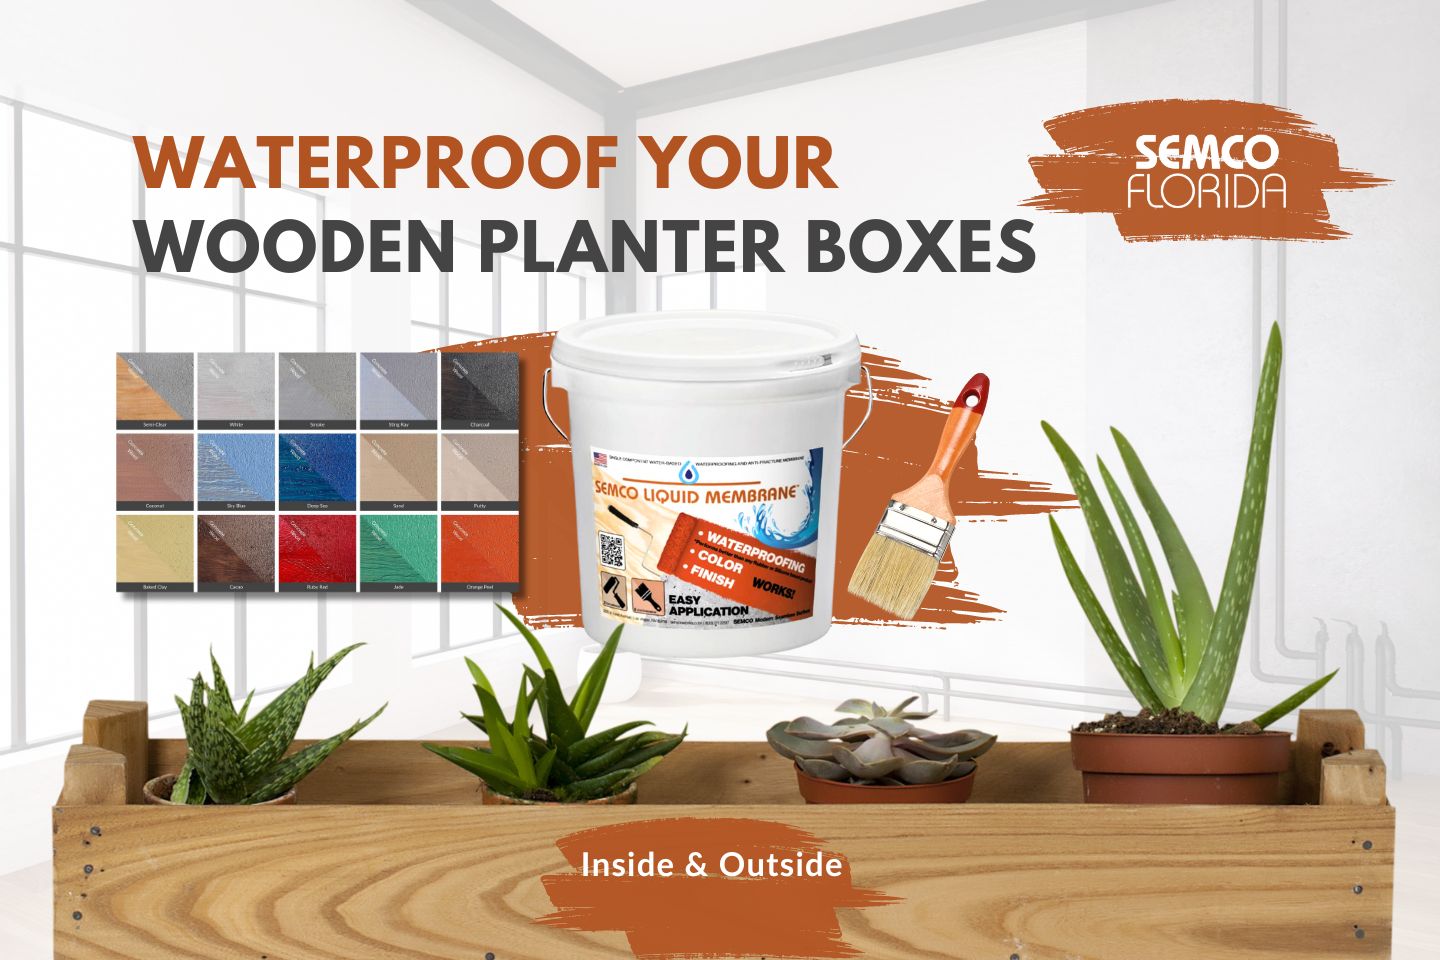 How To Waterproof A Wooden Planter Box and How to Waterproof The Inside Of A Wood Planter Box